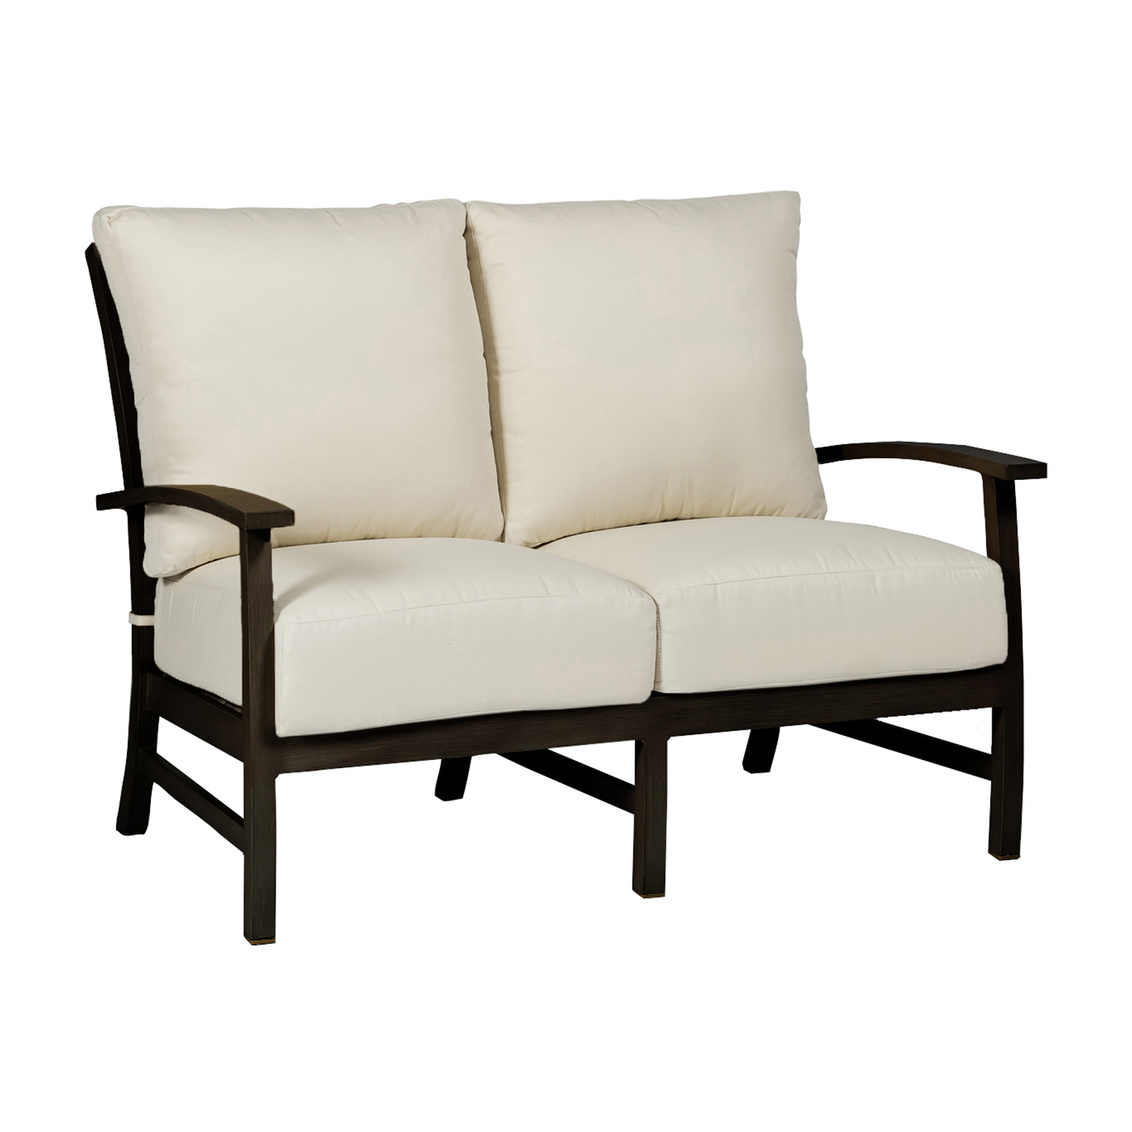 charleston loveseat in mahogany – frame only product image